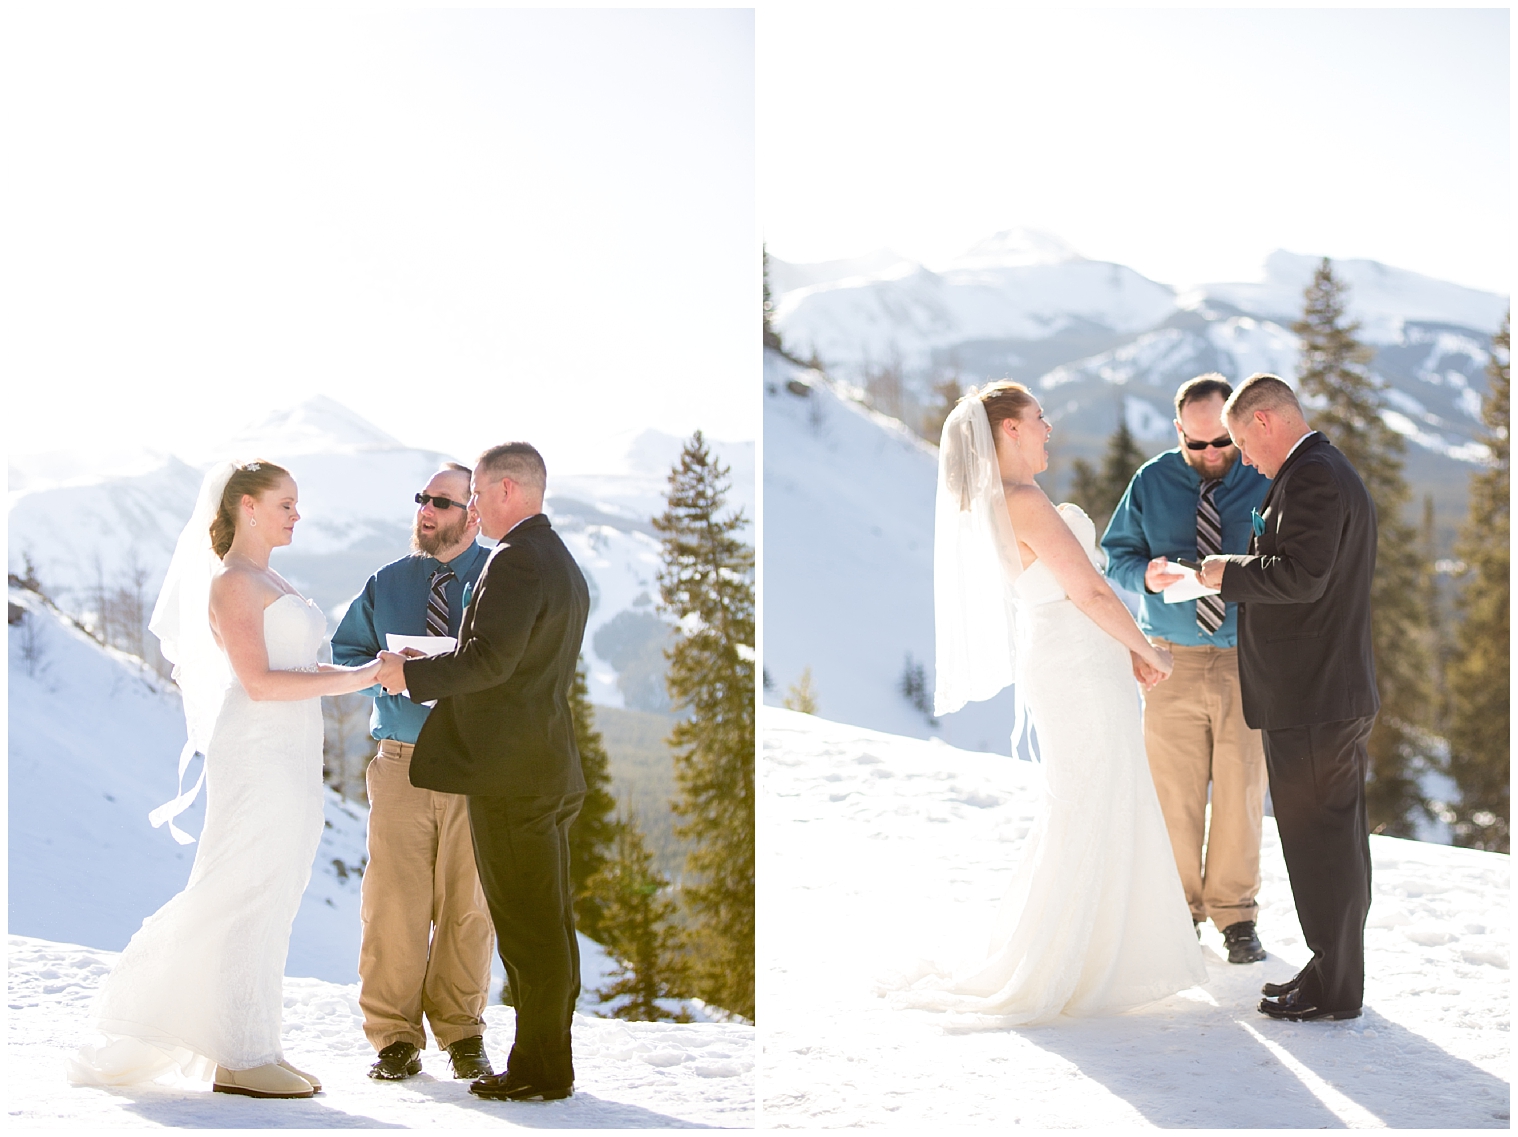 Bride and groom stand together during their winter mountain elopement at Boreas Pass in Breckenridge.